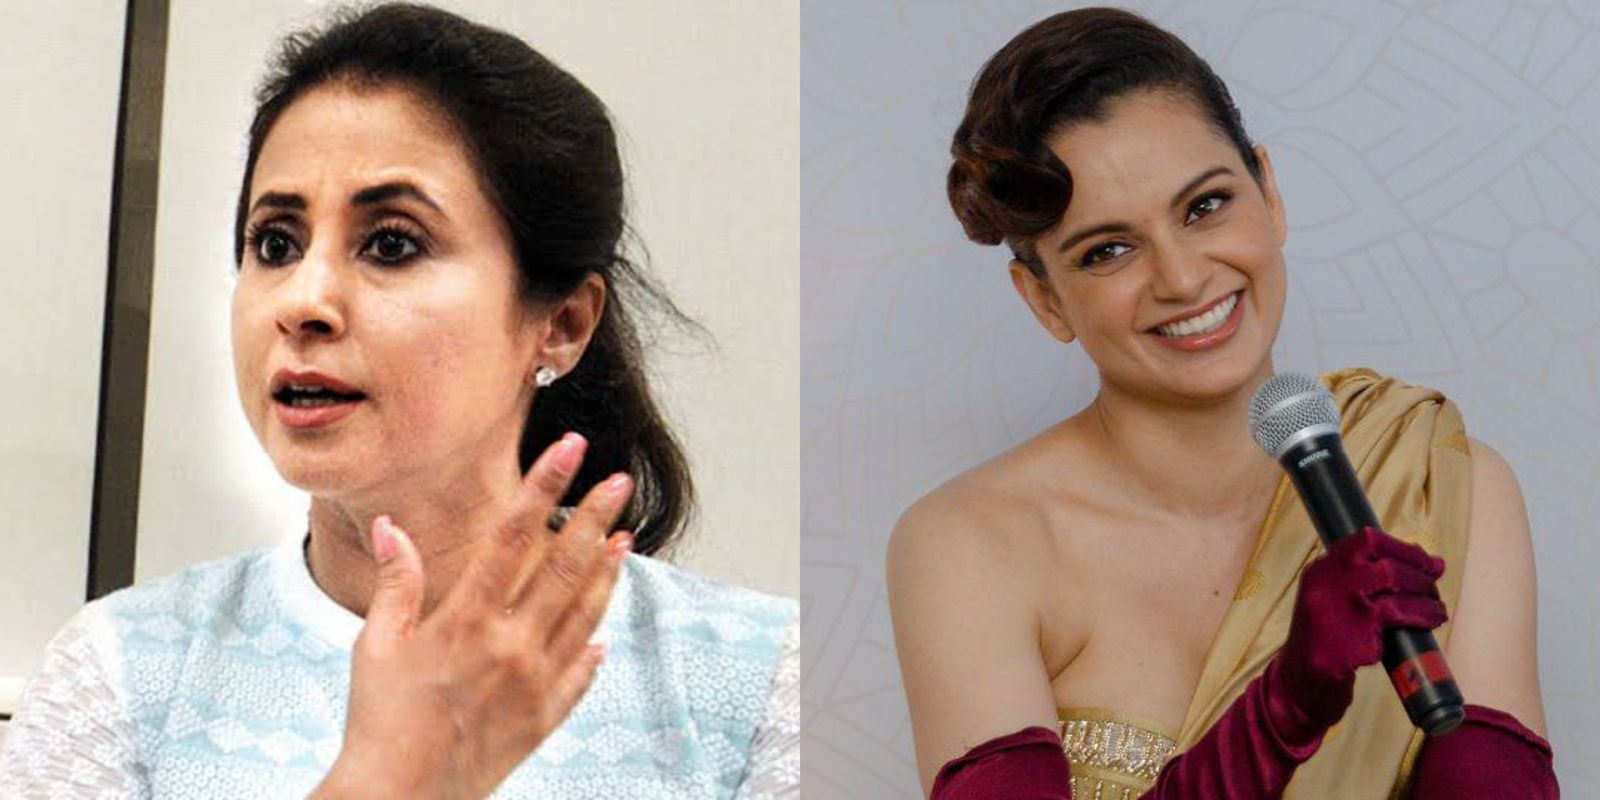 Urmila Matondkar On Kangana Ranaut: ‘If One Person Shouts All The Time, Doesn’t Mean The Person Is Speaking The Truth’